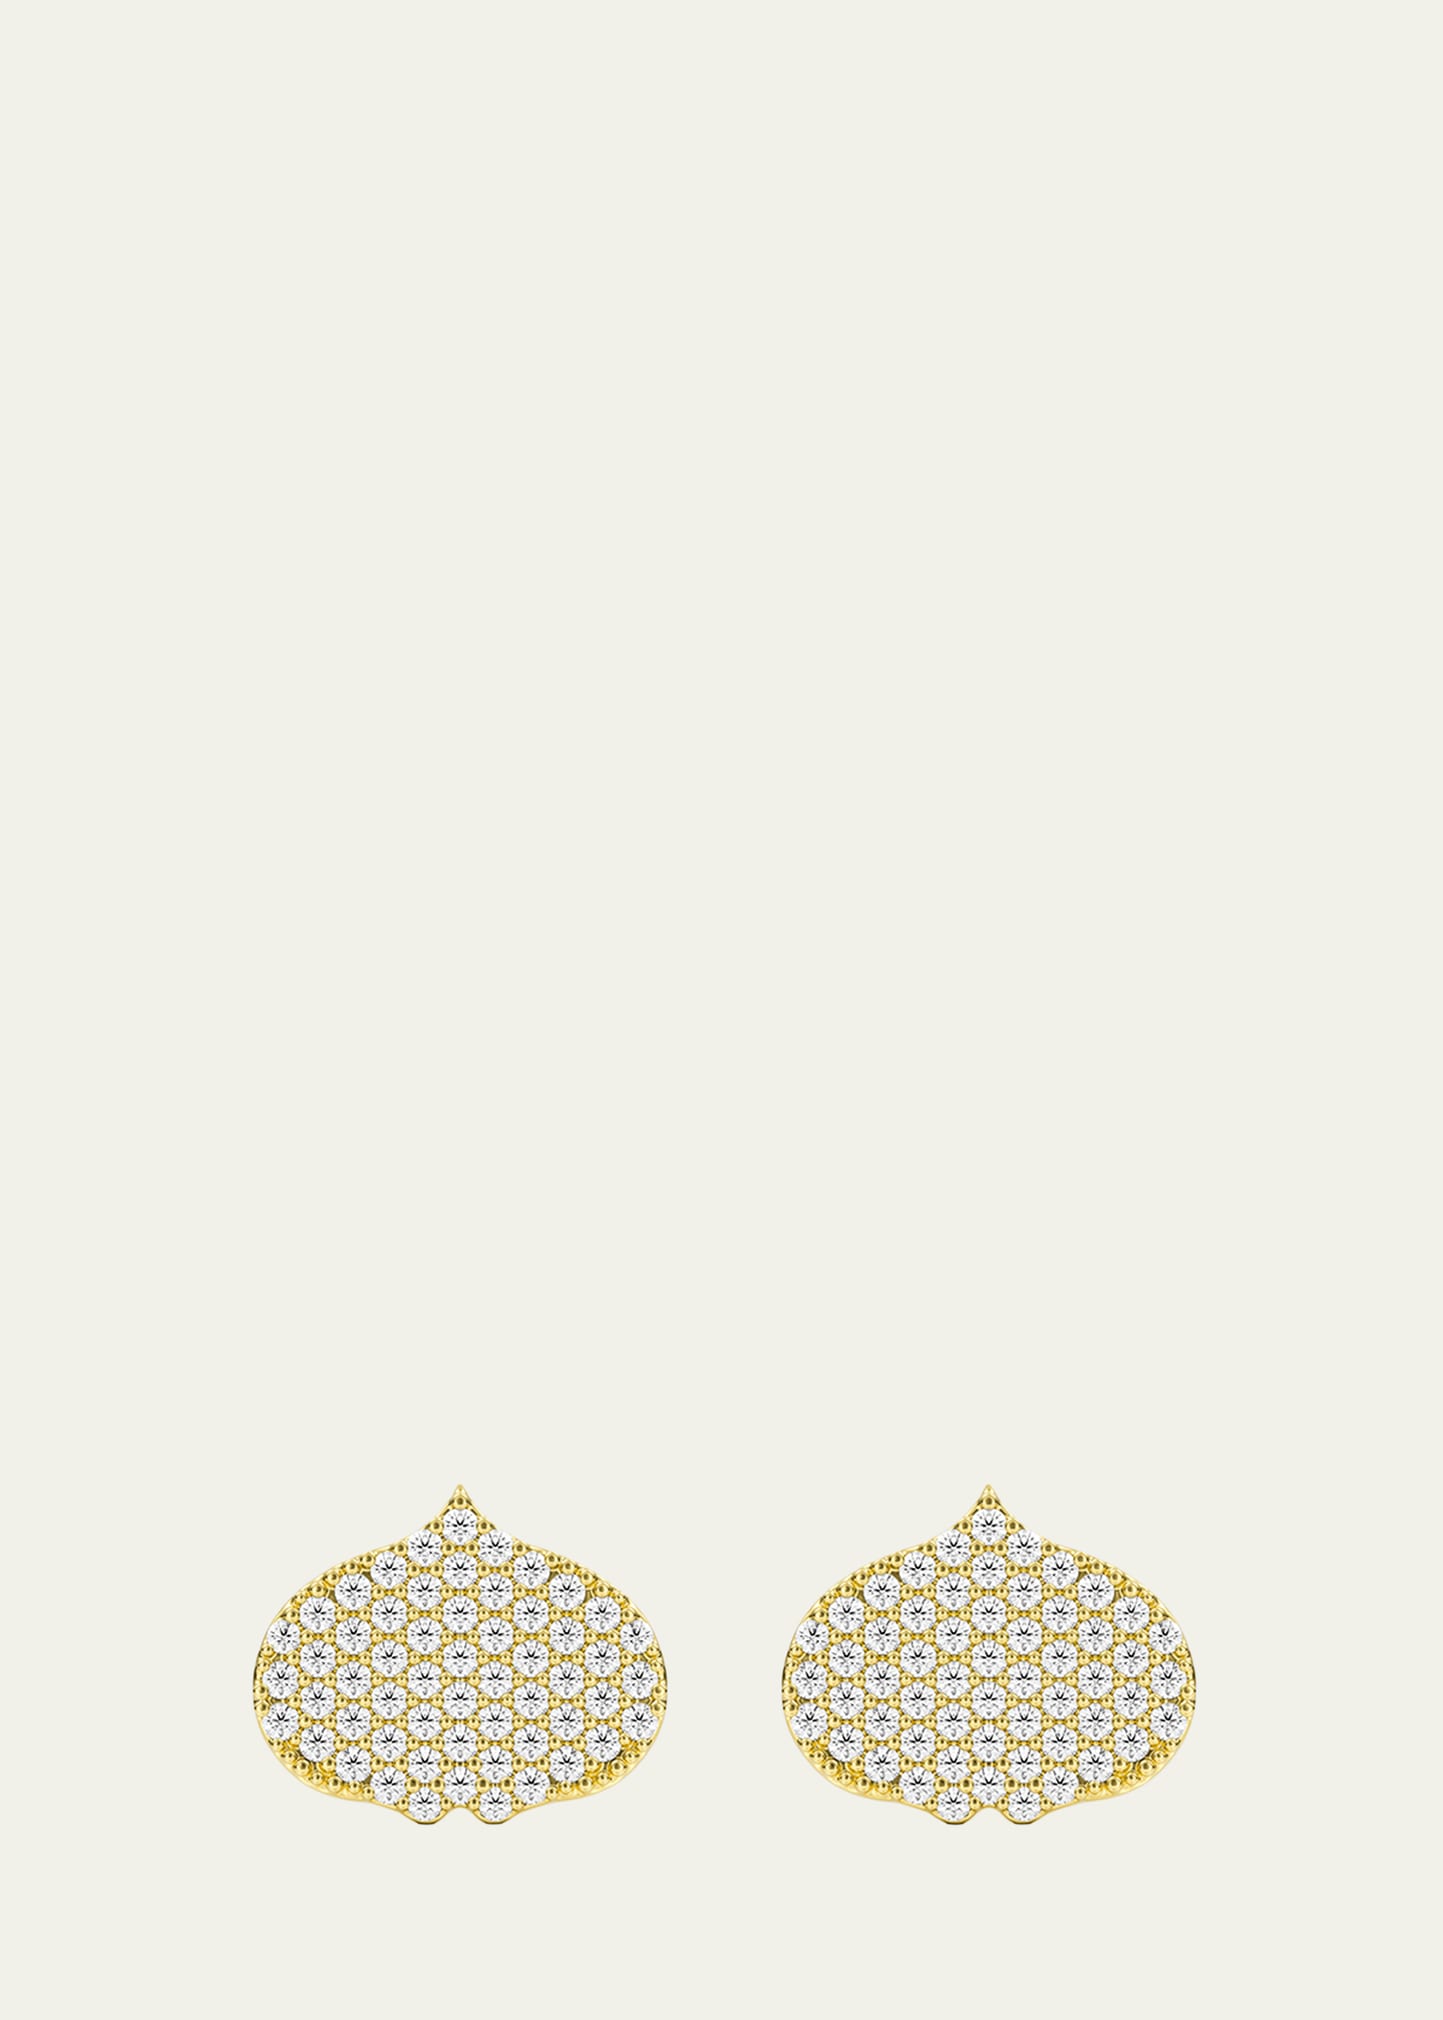 Eye Adore Stud Earrings in Gold and White Diamonds, 12mm